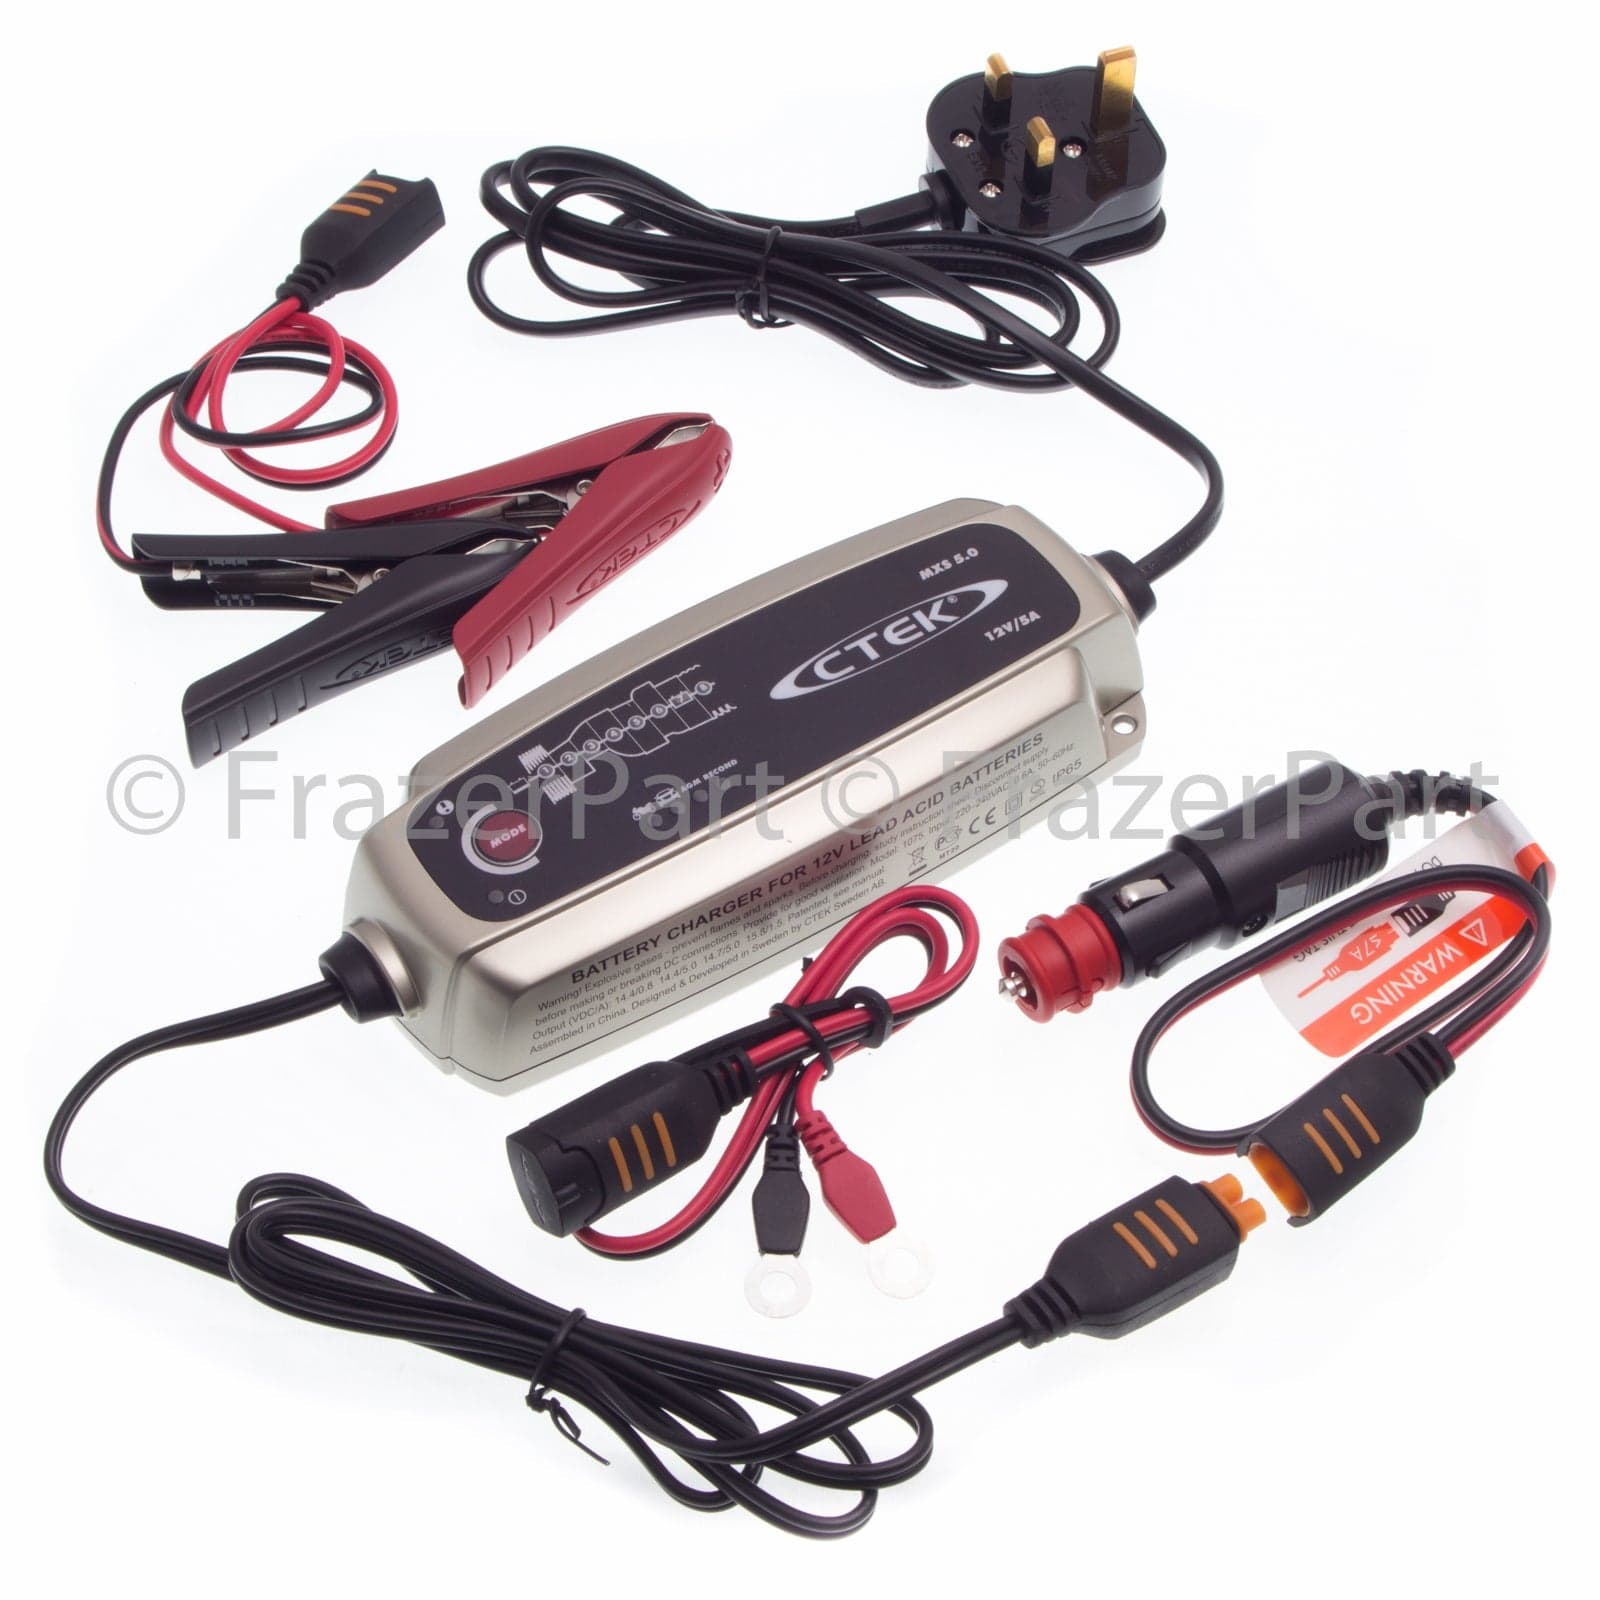 Porsche battery charger. Fully automatic battery trickle charger